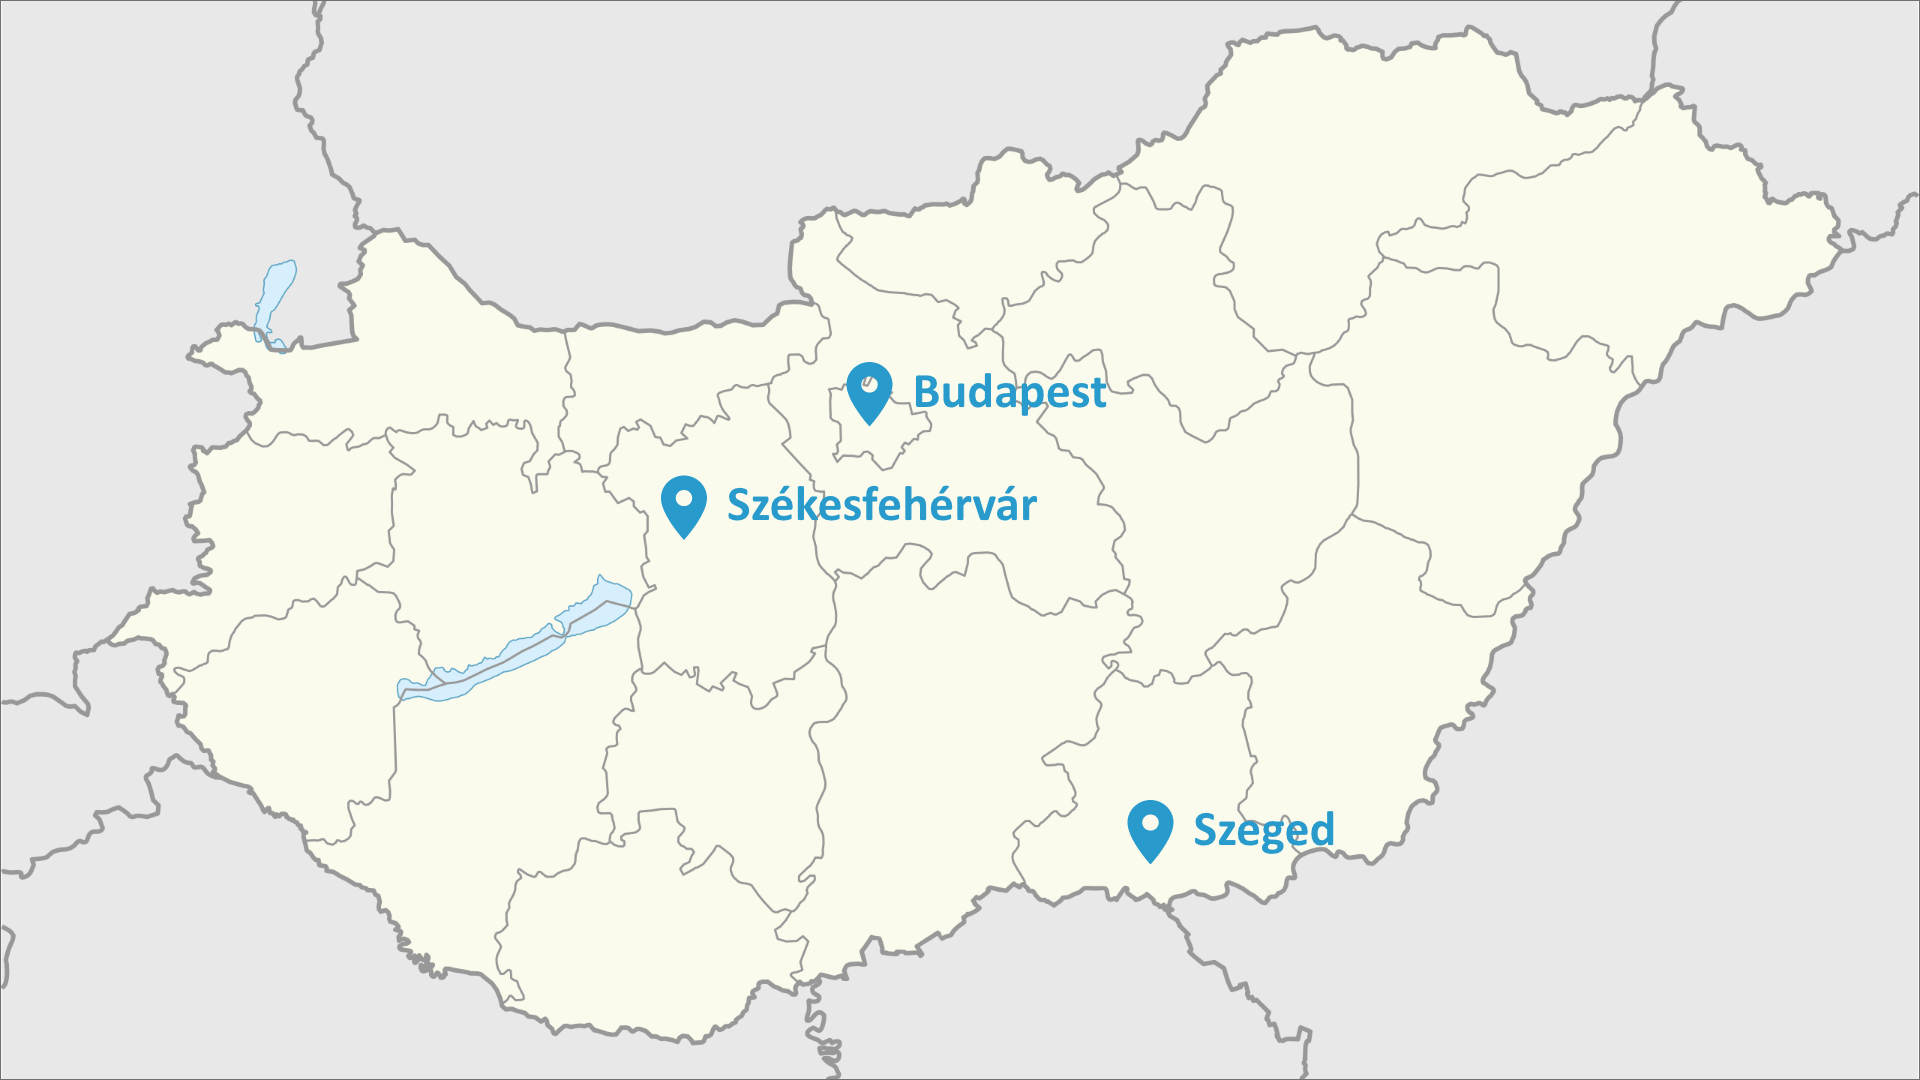 Offices in three locations